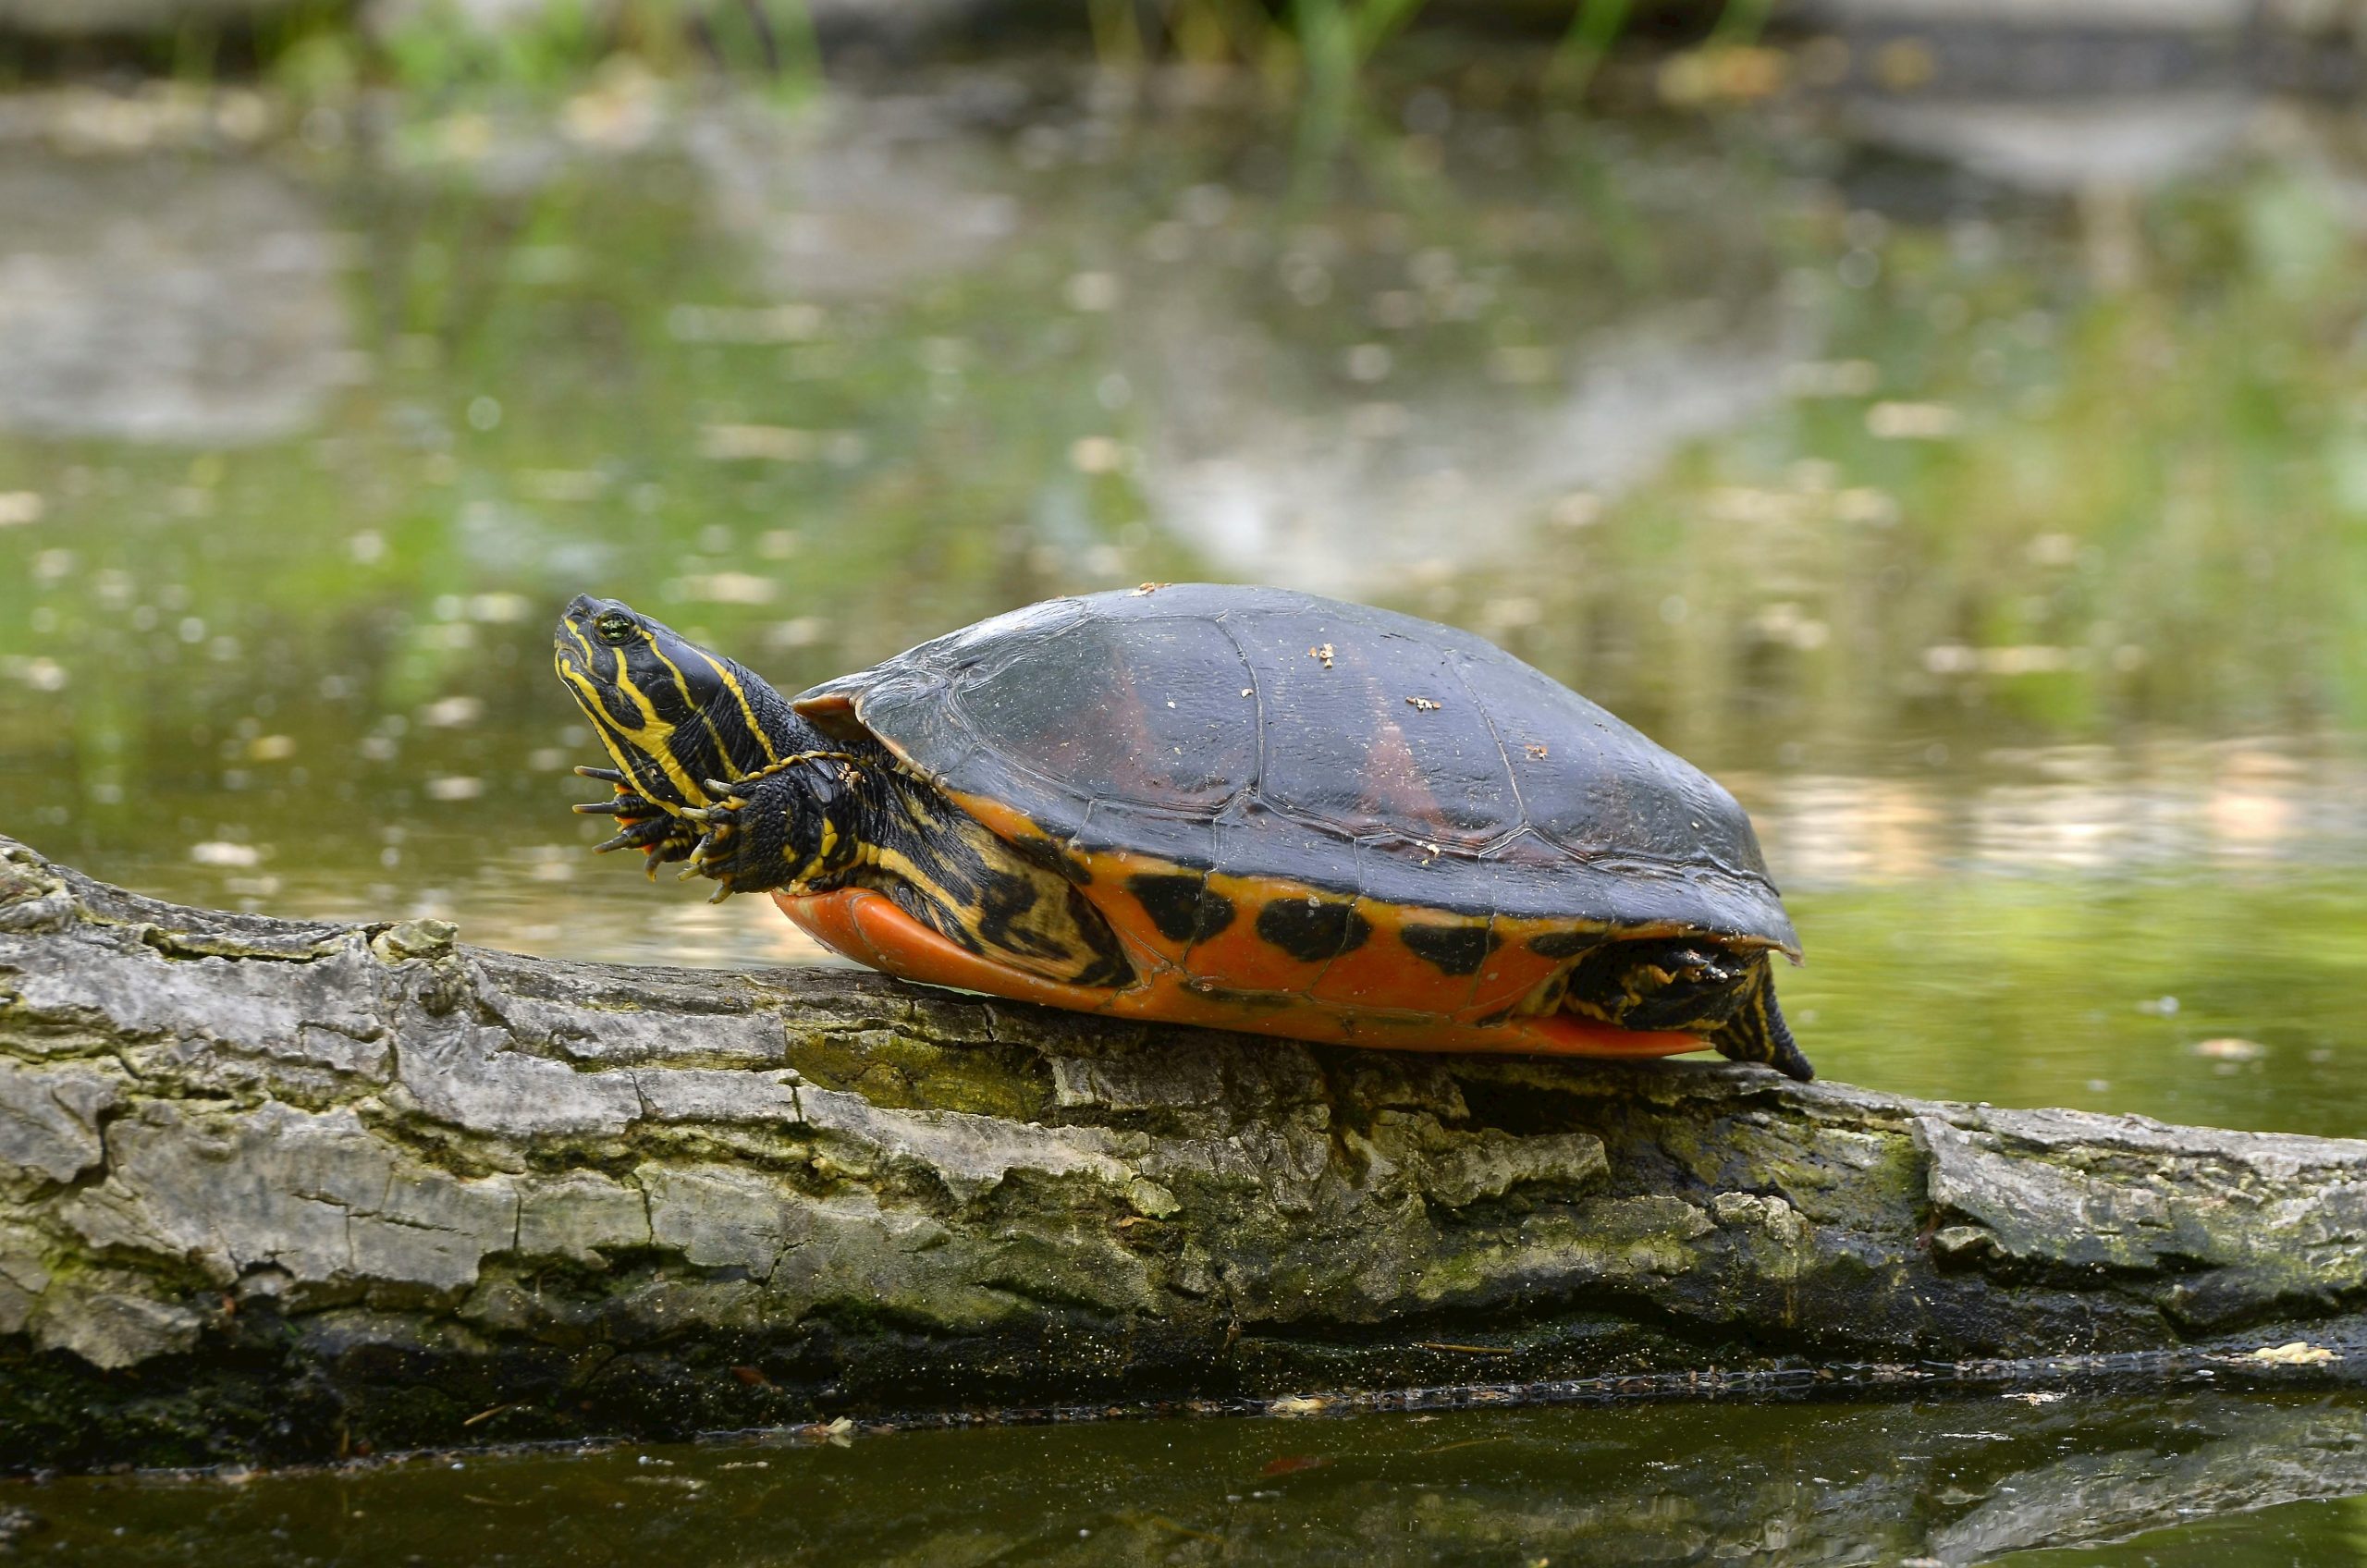 How To Take Care Of A Painted Turtle